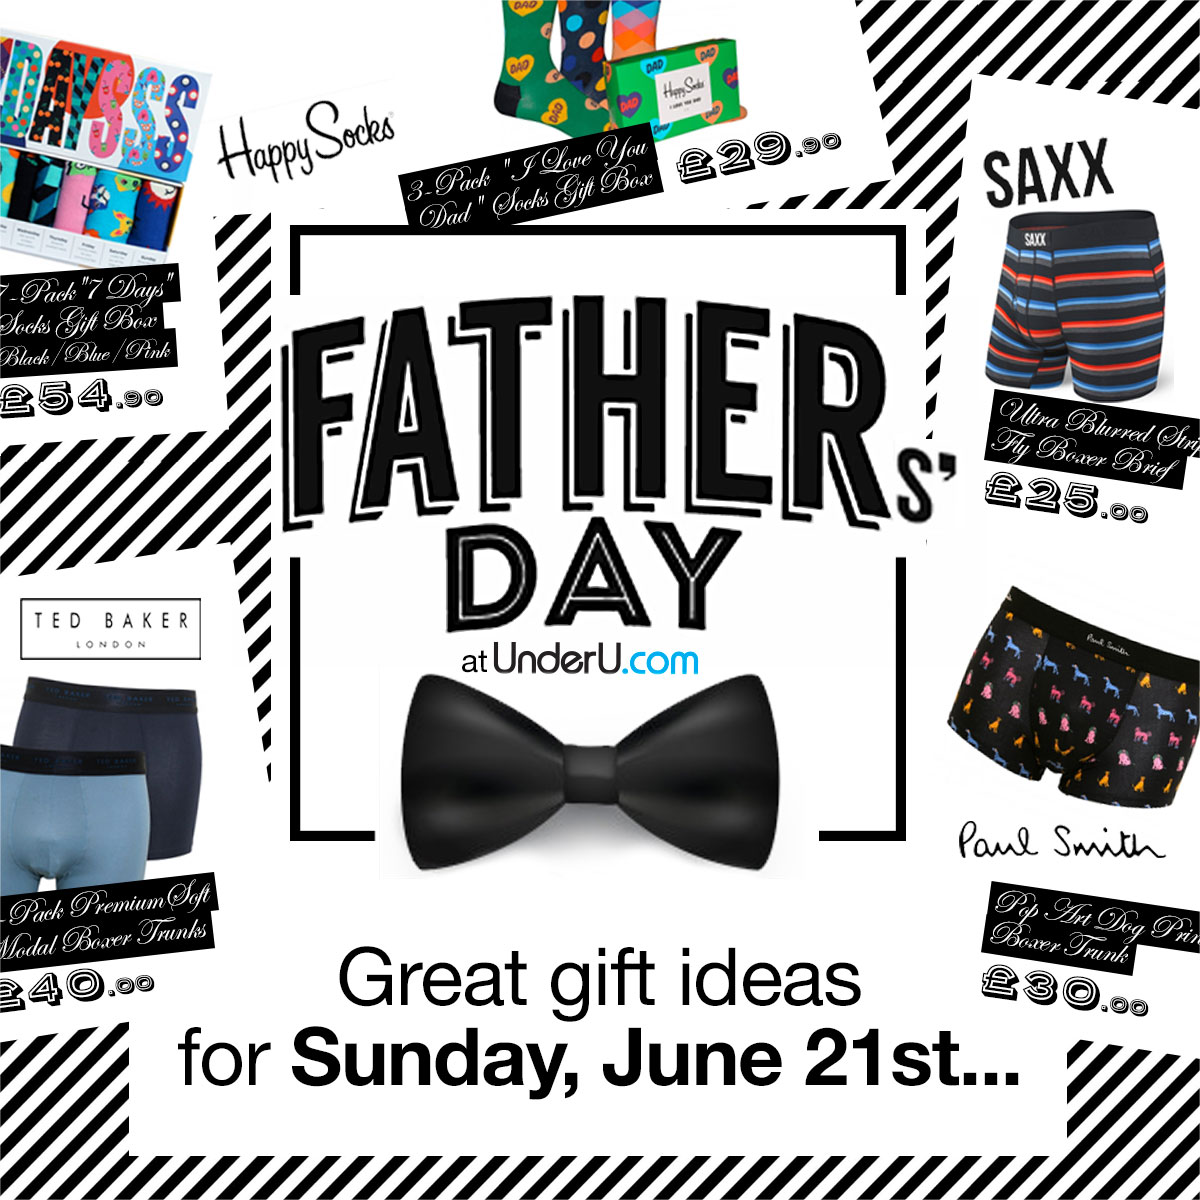 Great gift ideas for Fathers'' Day